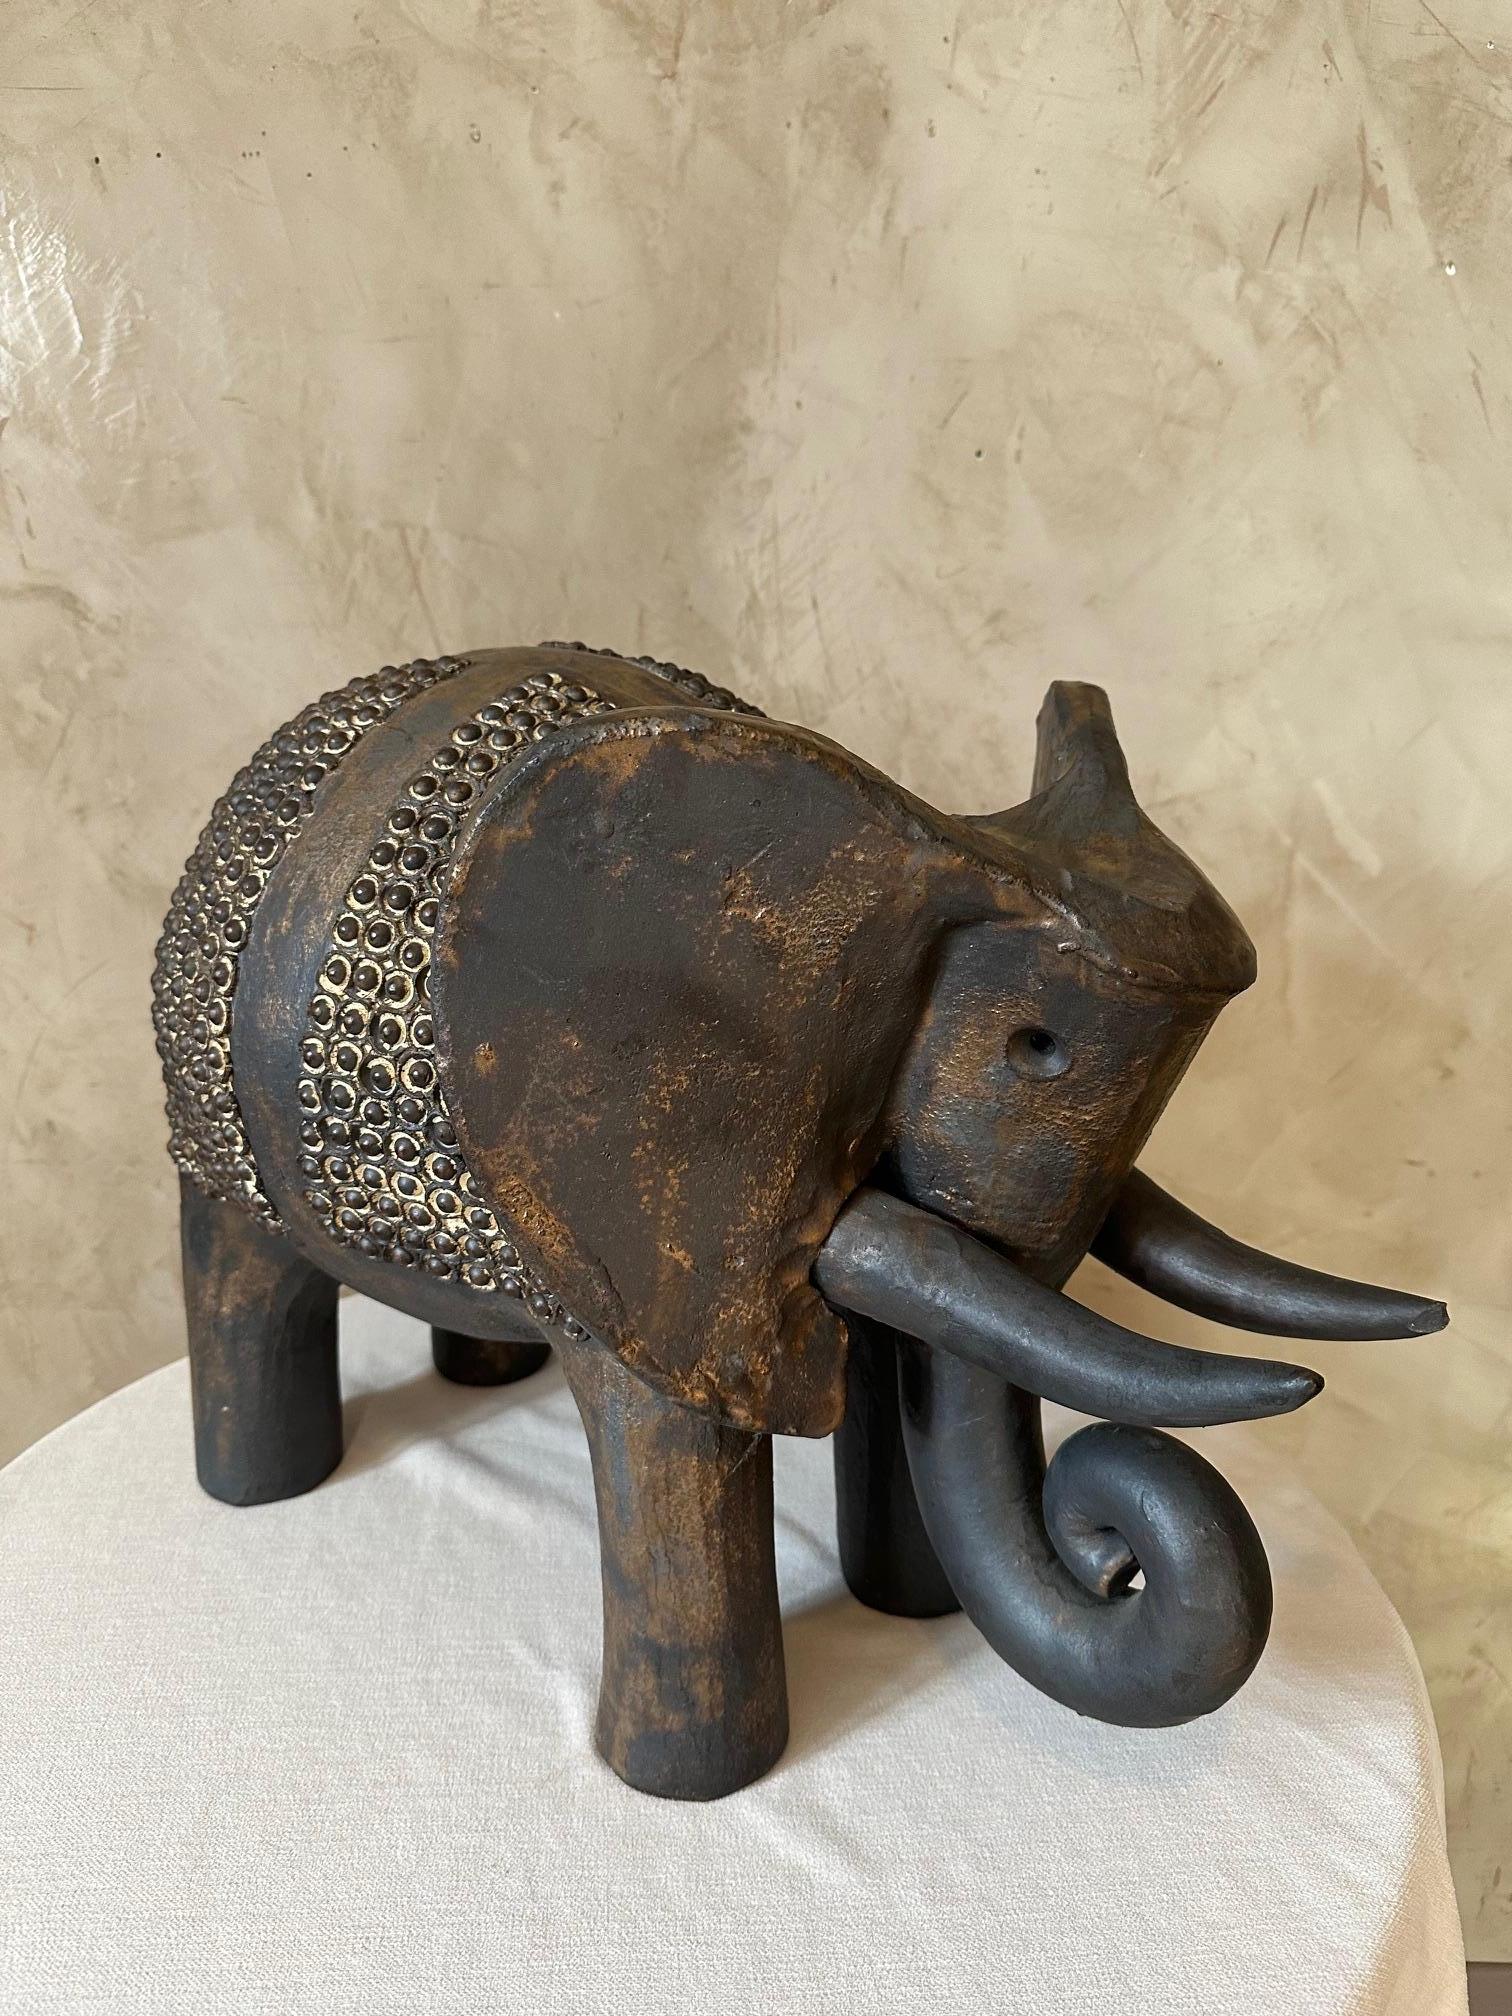 Rare and unique piece dating from the 2000s!! 
Large Ceramic elephant signed by Dominique Pouchain.
Incredible ceramic work. The back of the elephant is carved with a pearl pattern.
Slight accident on a defense. Possibility of acquiring a smaller